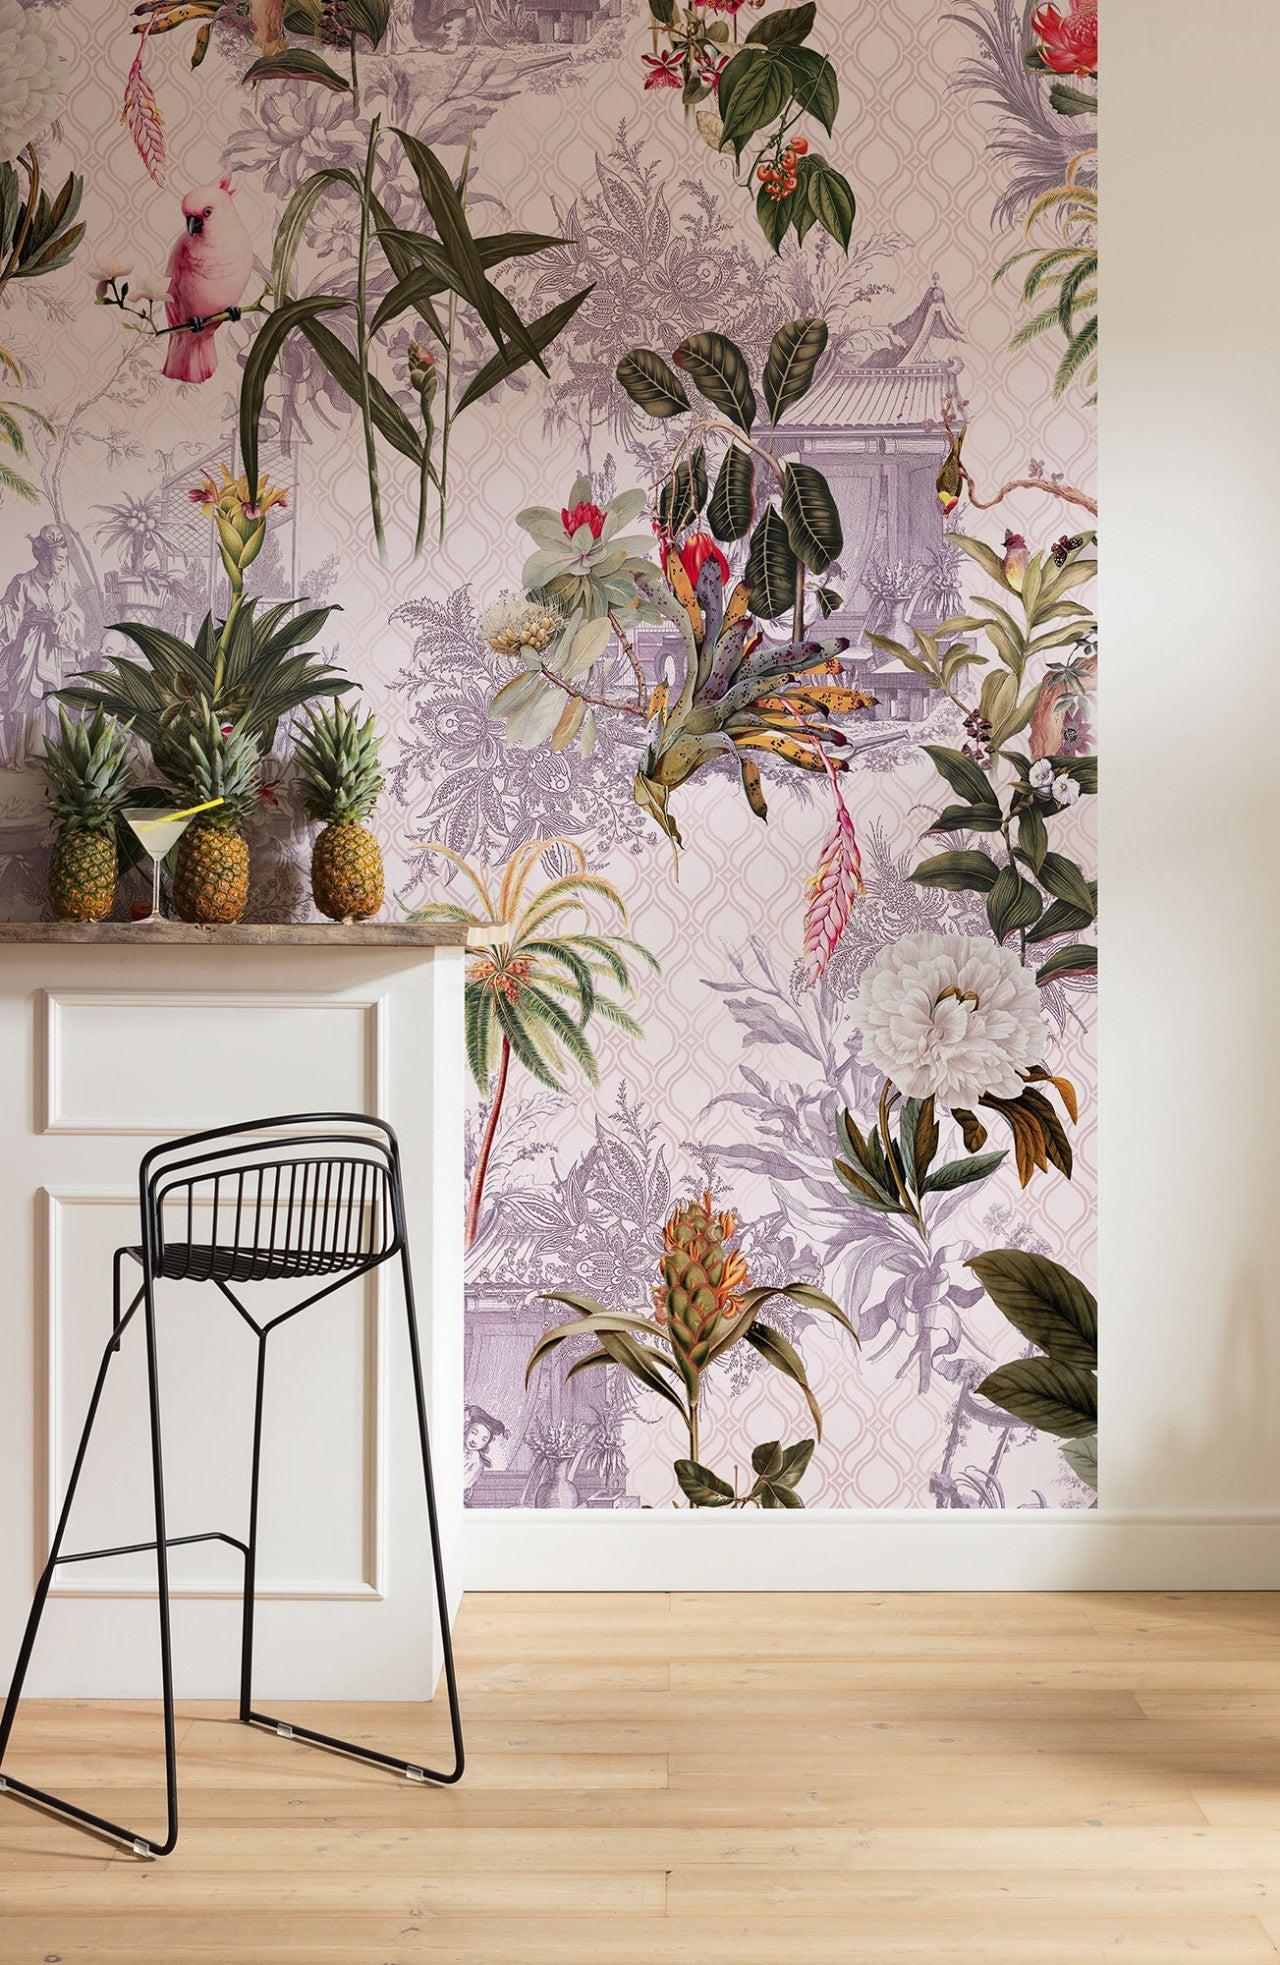 Eda Tropical Mural Wallpaper-Wall Decor-ECO MURALS, MURALS, MURALS / WALLPAPERS, NON-WOVEN WALLPAPER, PALM WALLPAPER, TROPICAL MURAL, TROPICAL WALLPAPERS-Forest Homes-Nature inspired decor-Nature decor